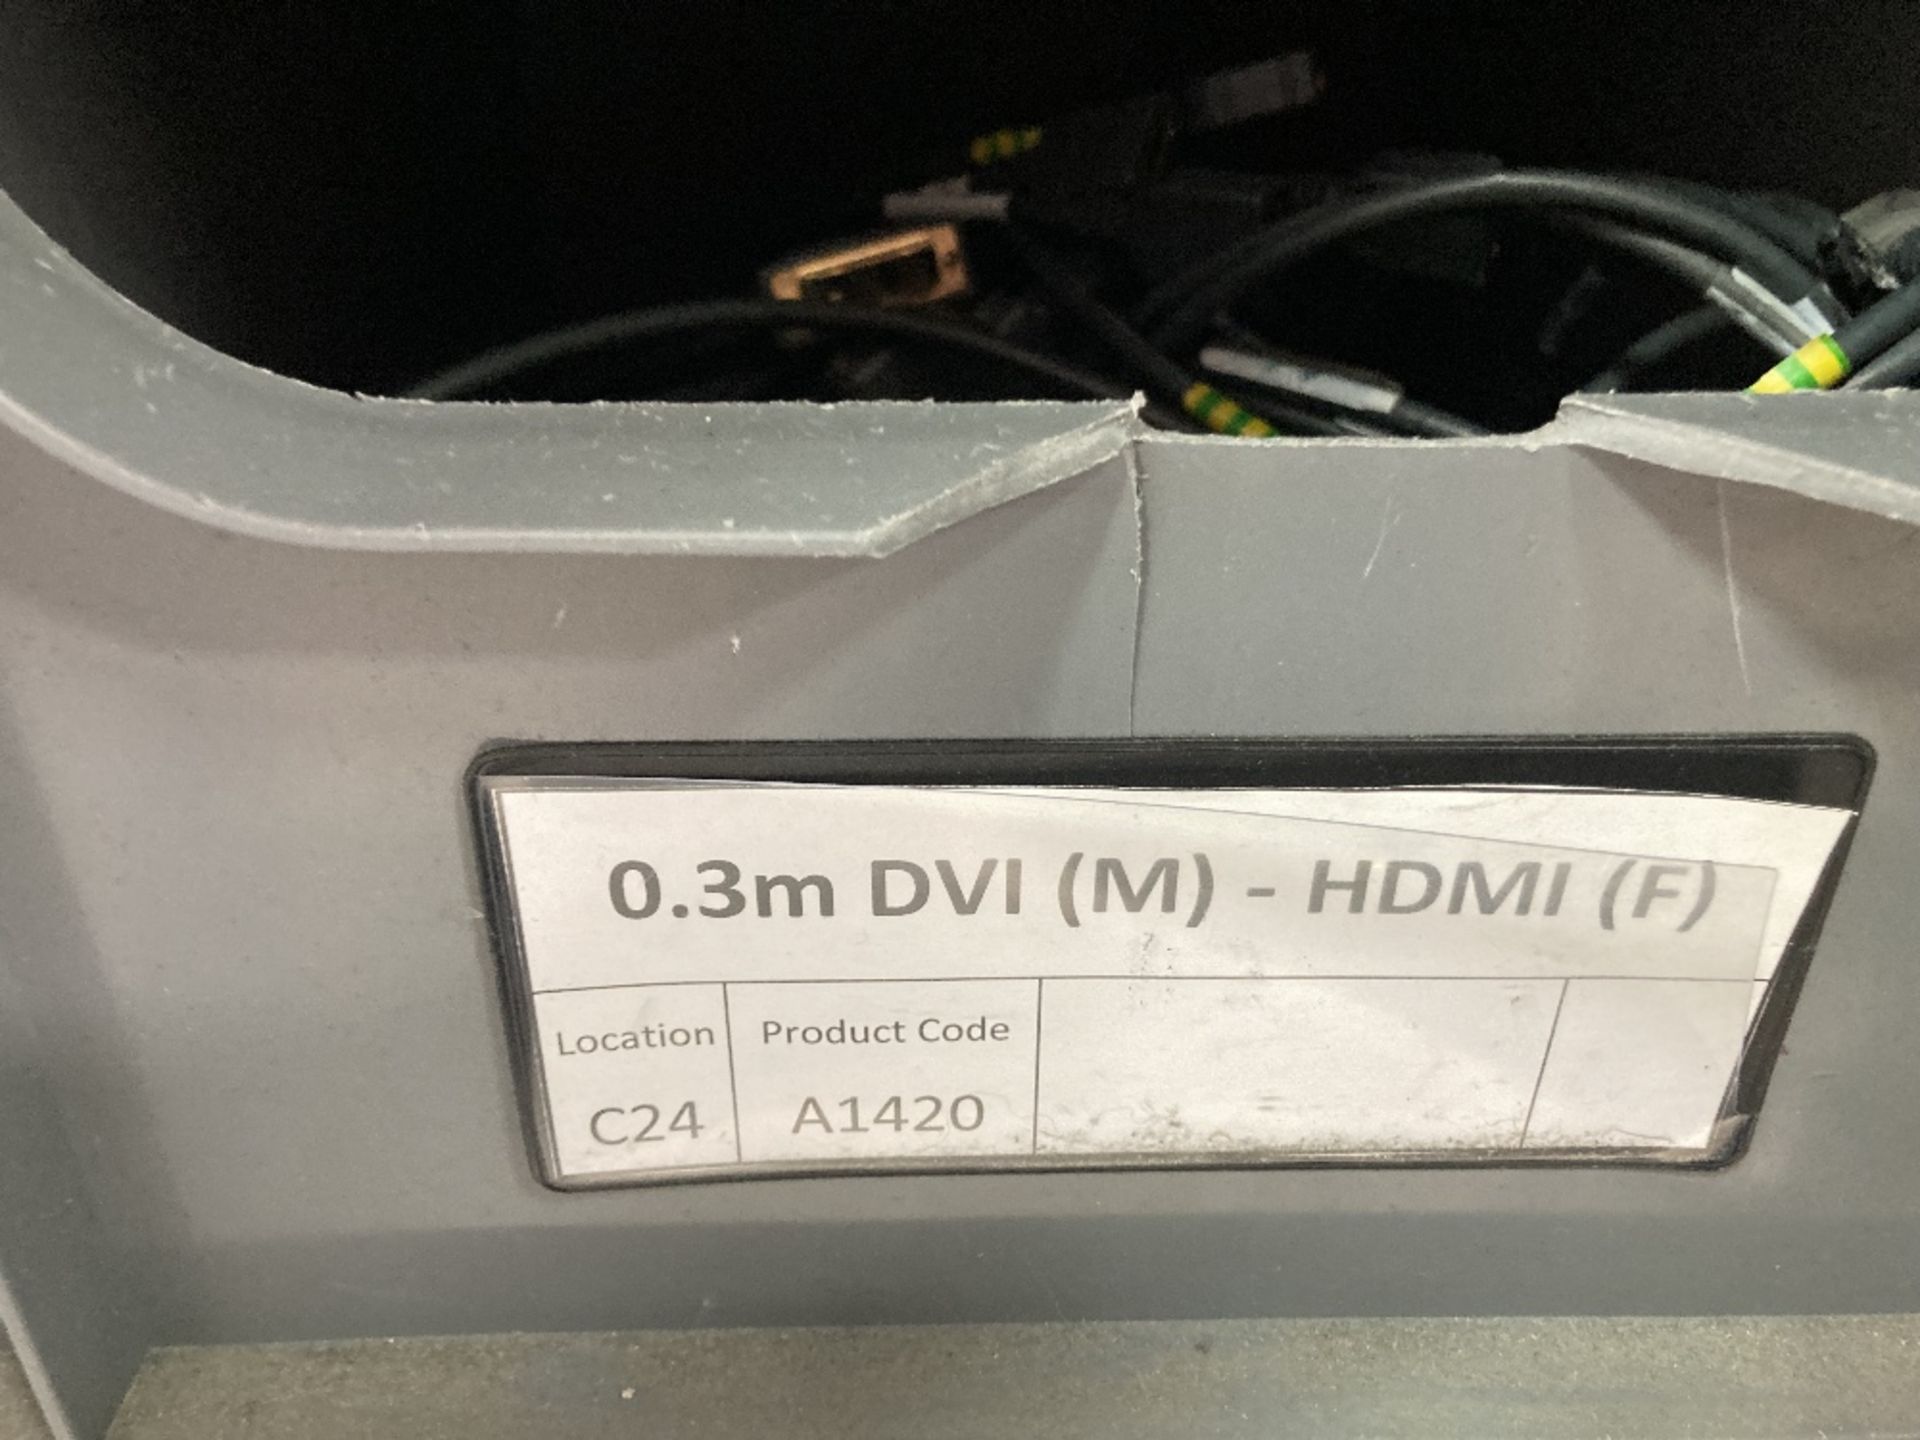 Large Quantity of 0.3m DVI M to HDMI F Adapter with Plastic Lin Bin - Image 3 of 3